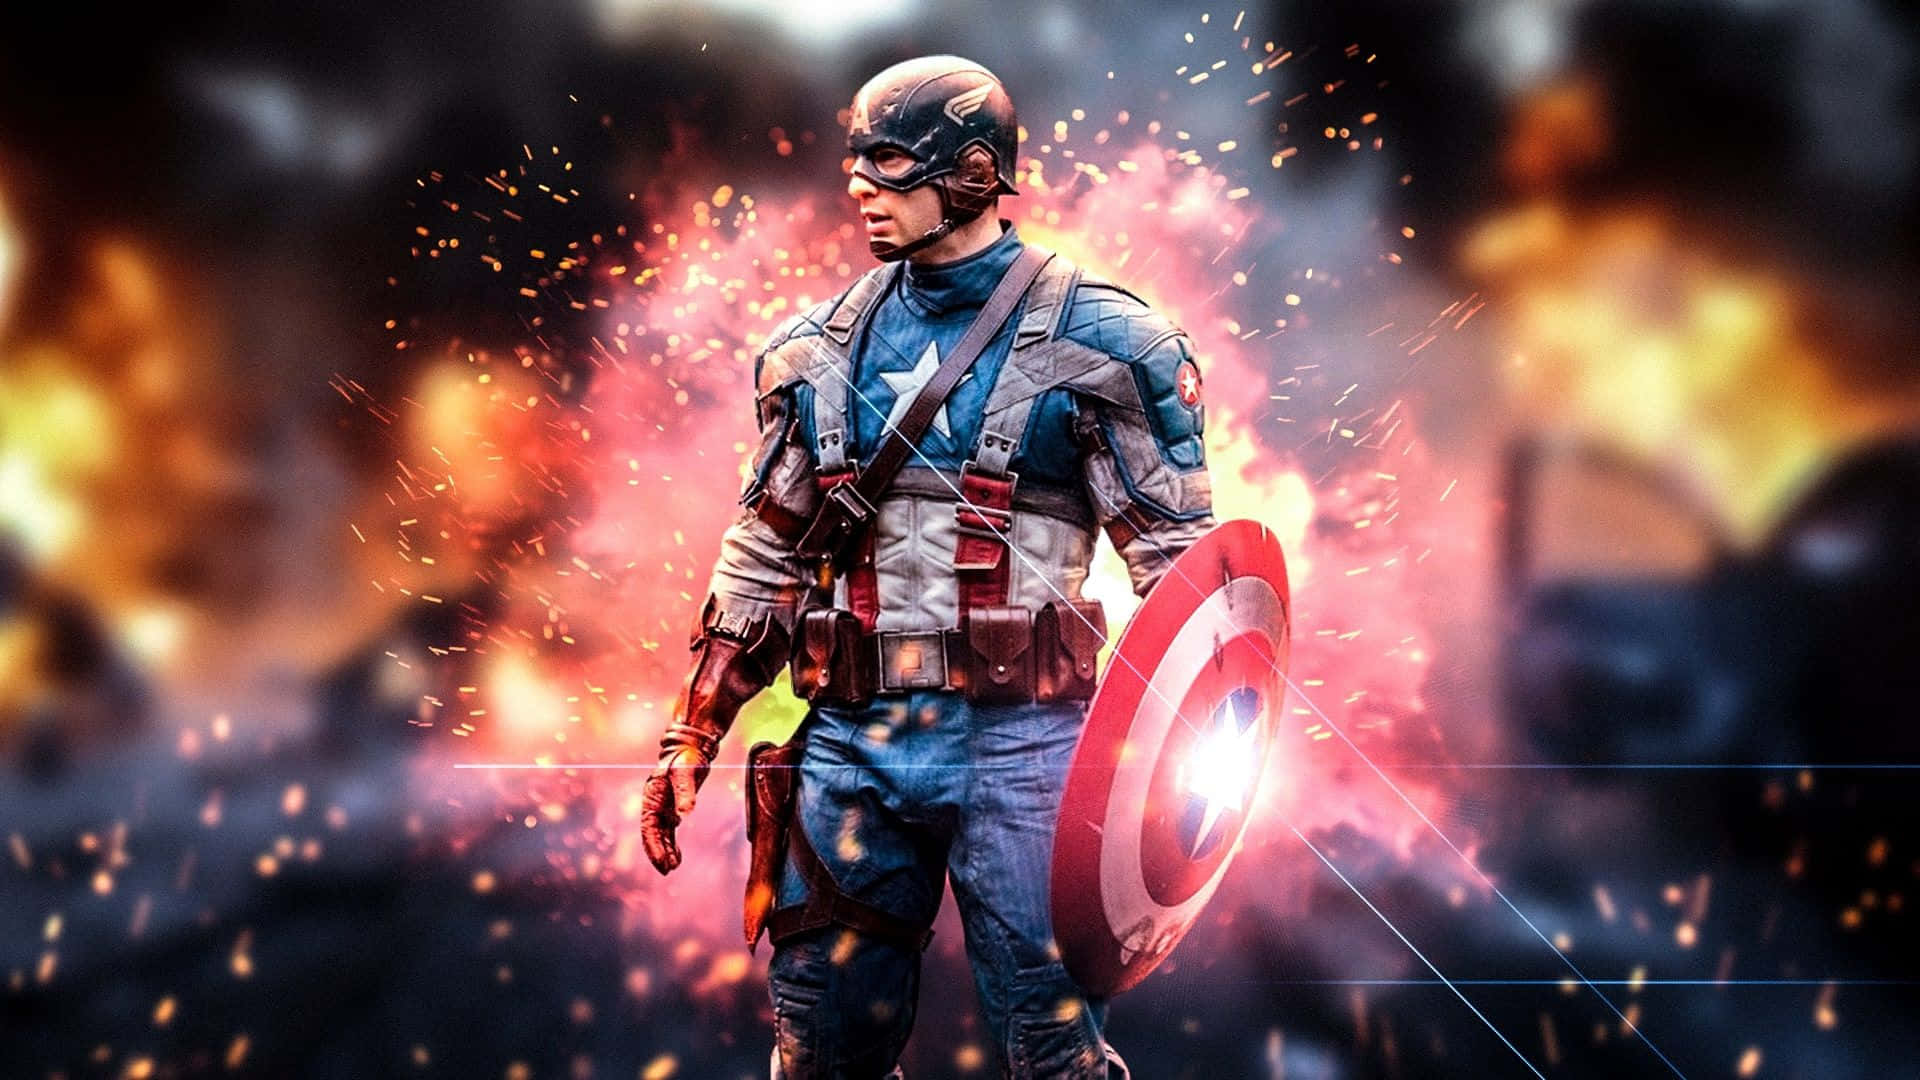 Captain America - Ready to save the world